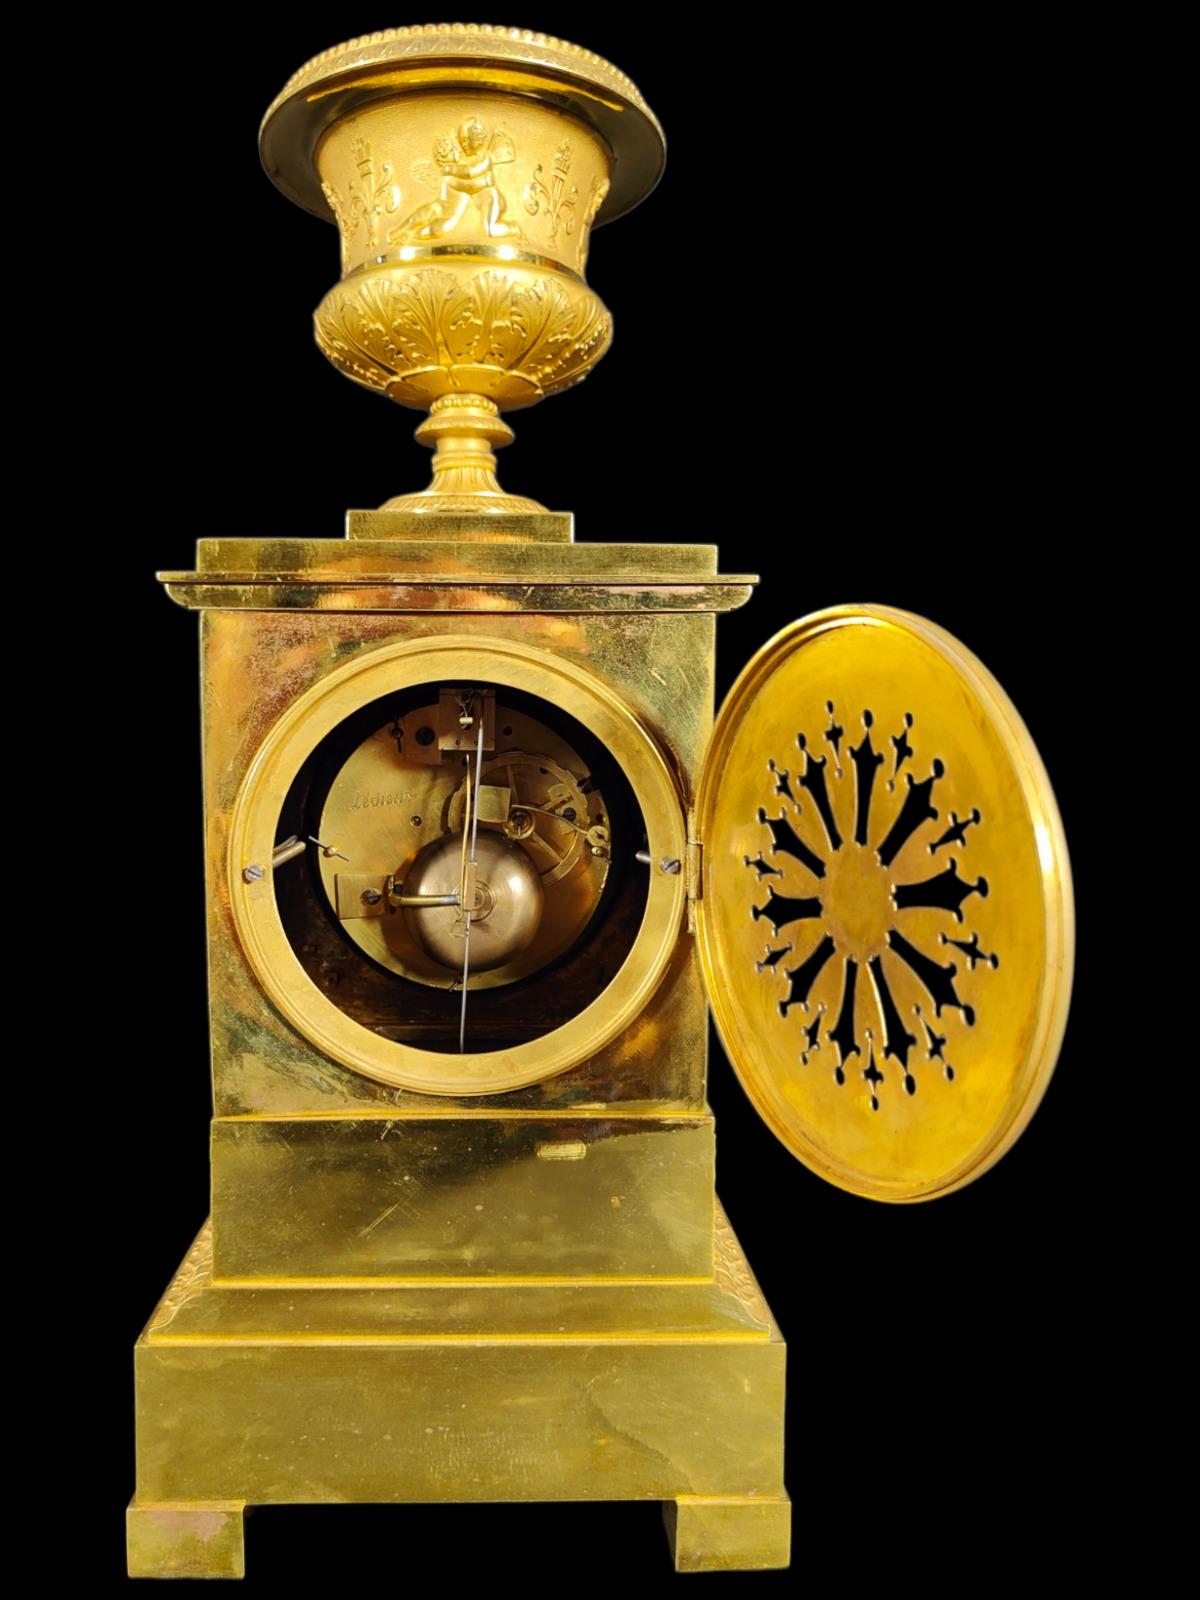 A fine quality French Empire clock by the eminent maker Ledieur, signed on the backplate of the movement.. The movement is an 8 day bell striking silk suspended movement and is also engraved Ledieur on the backplate of the movement. Circa